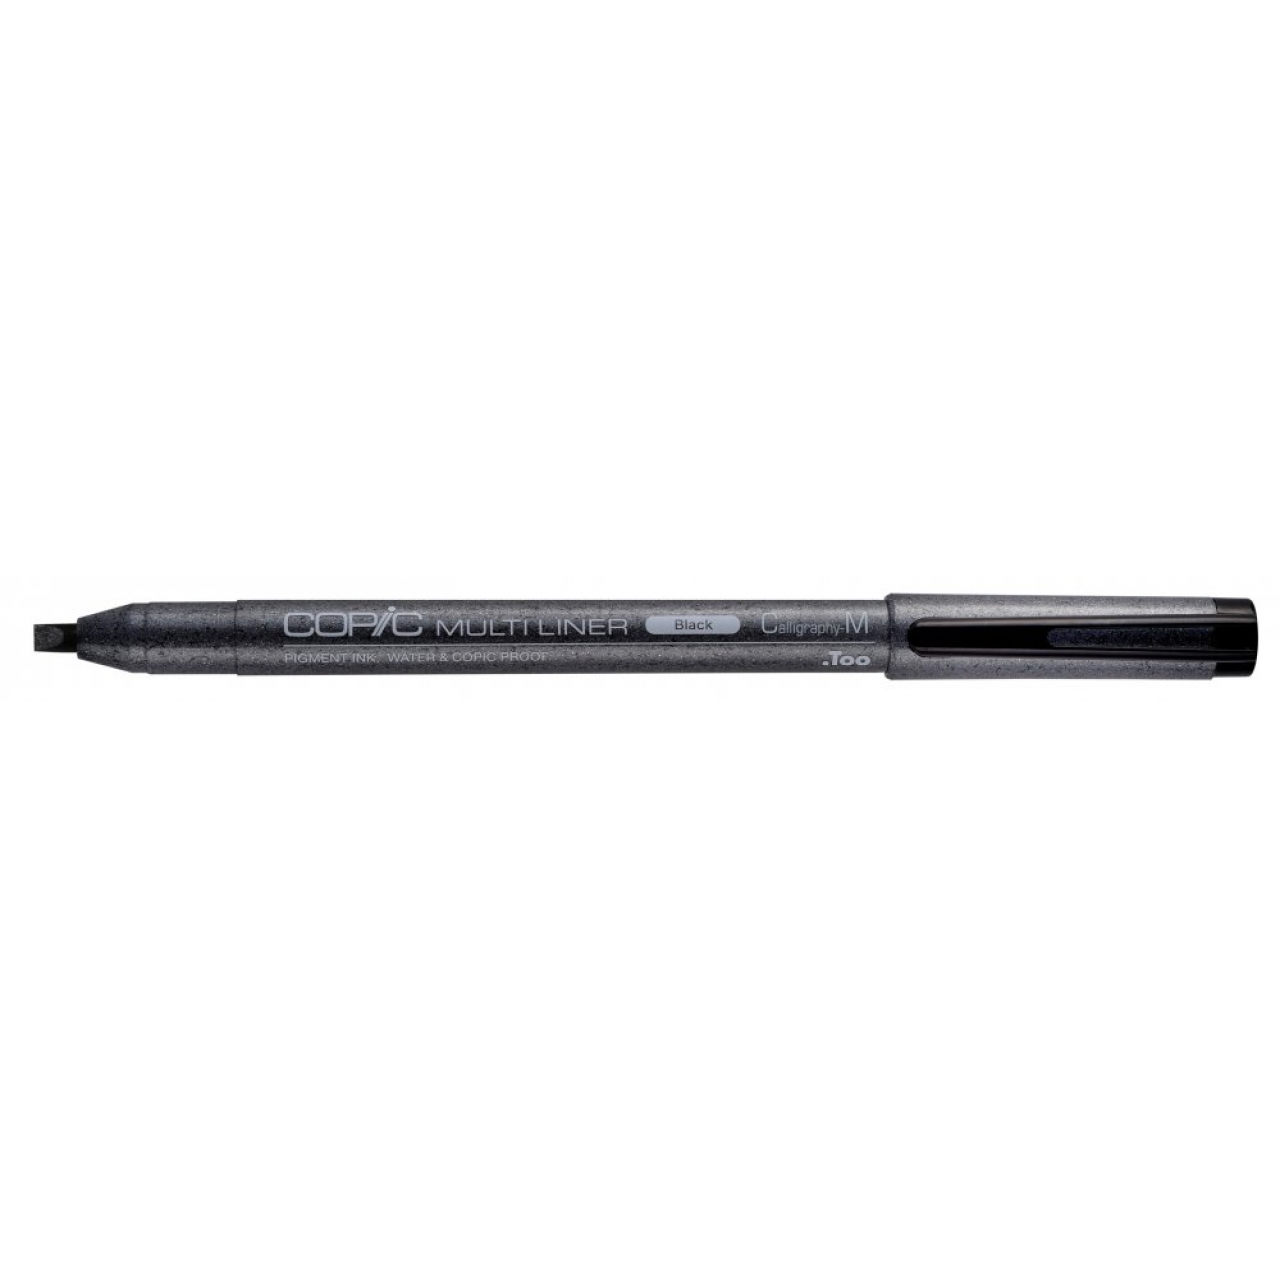 Multiliner Classic Siyah Calligraphy M